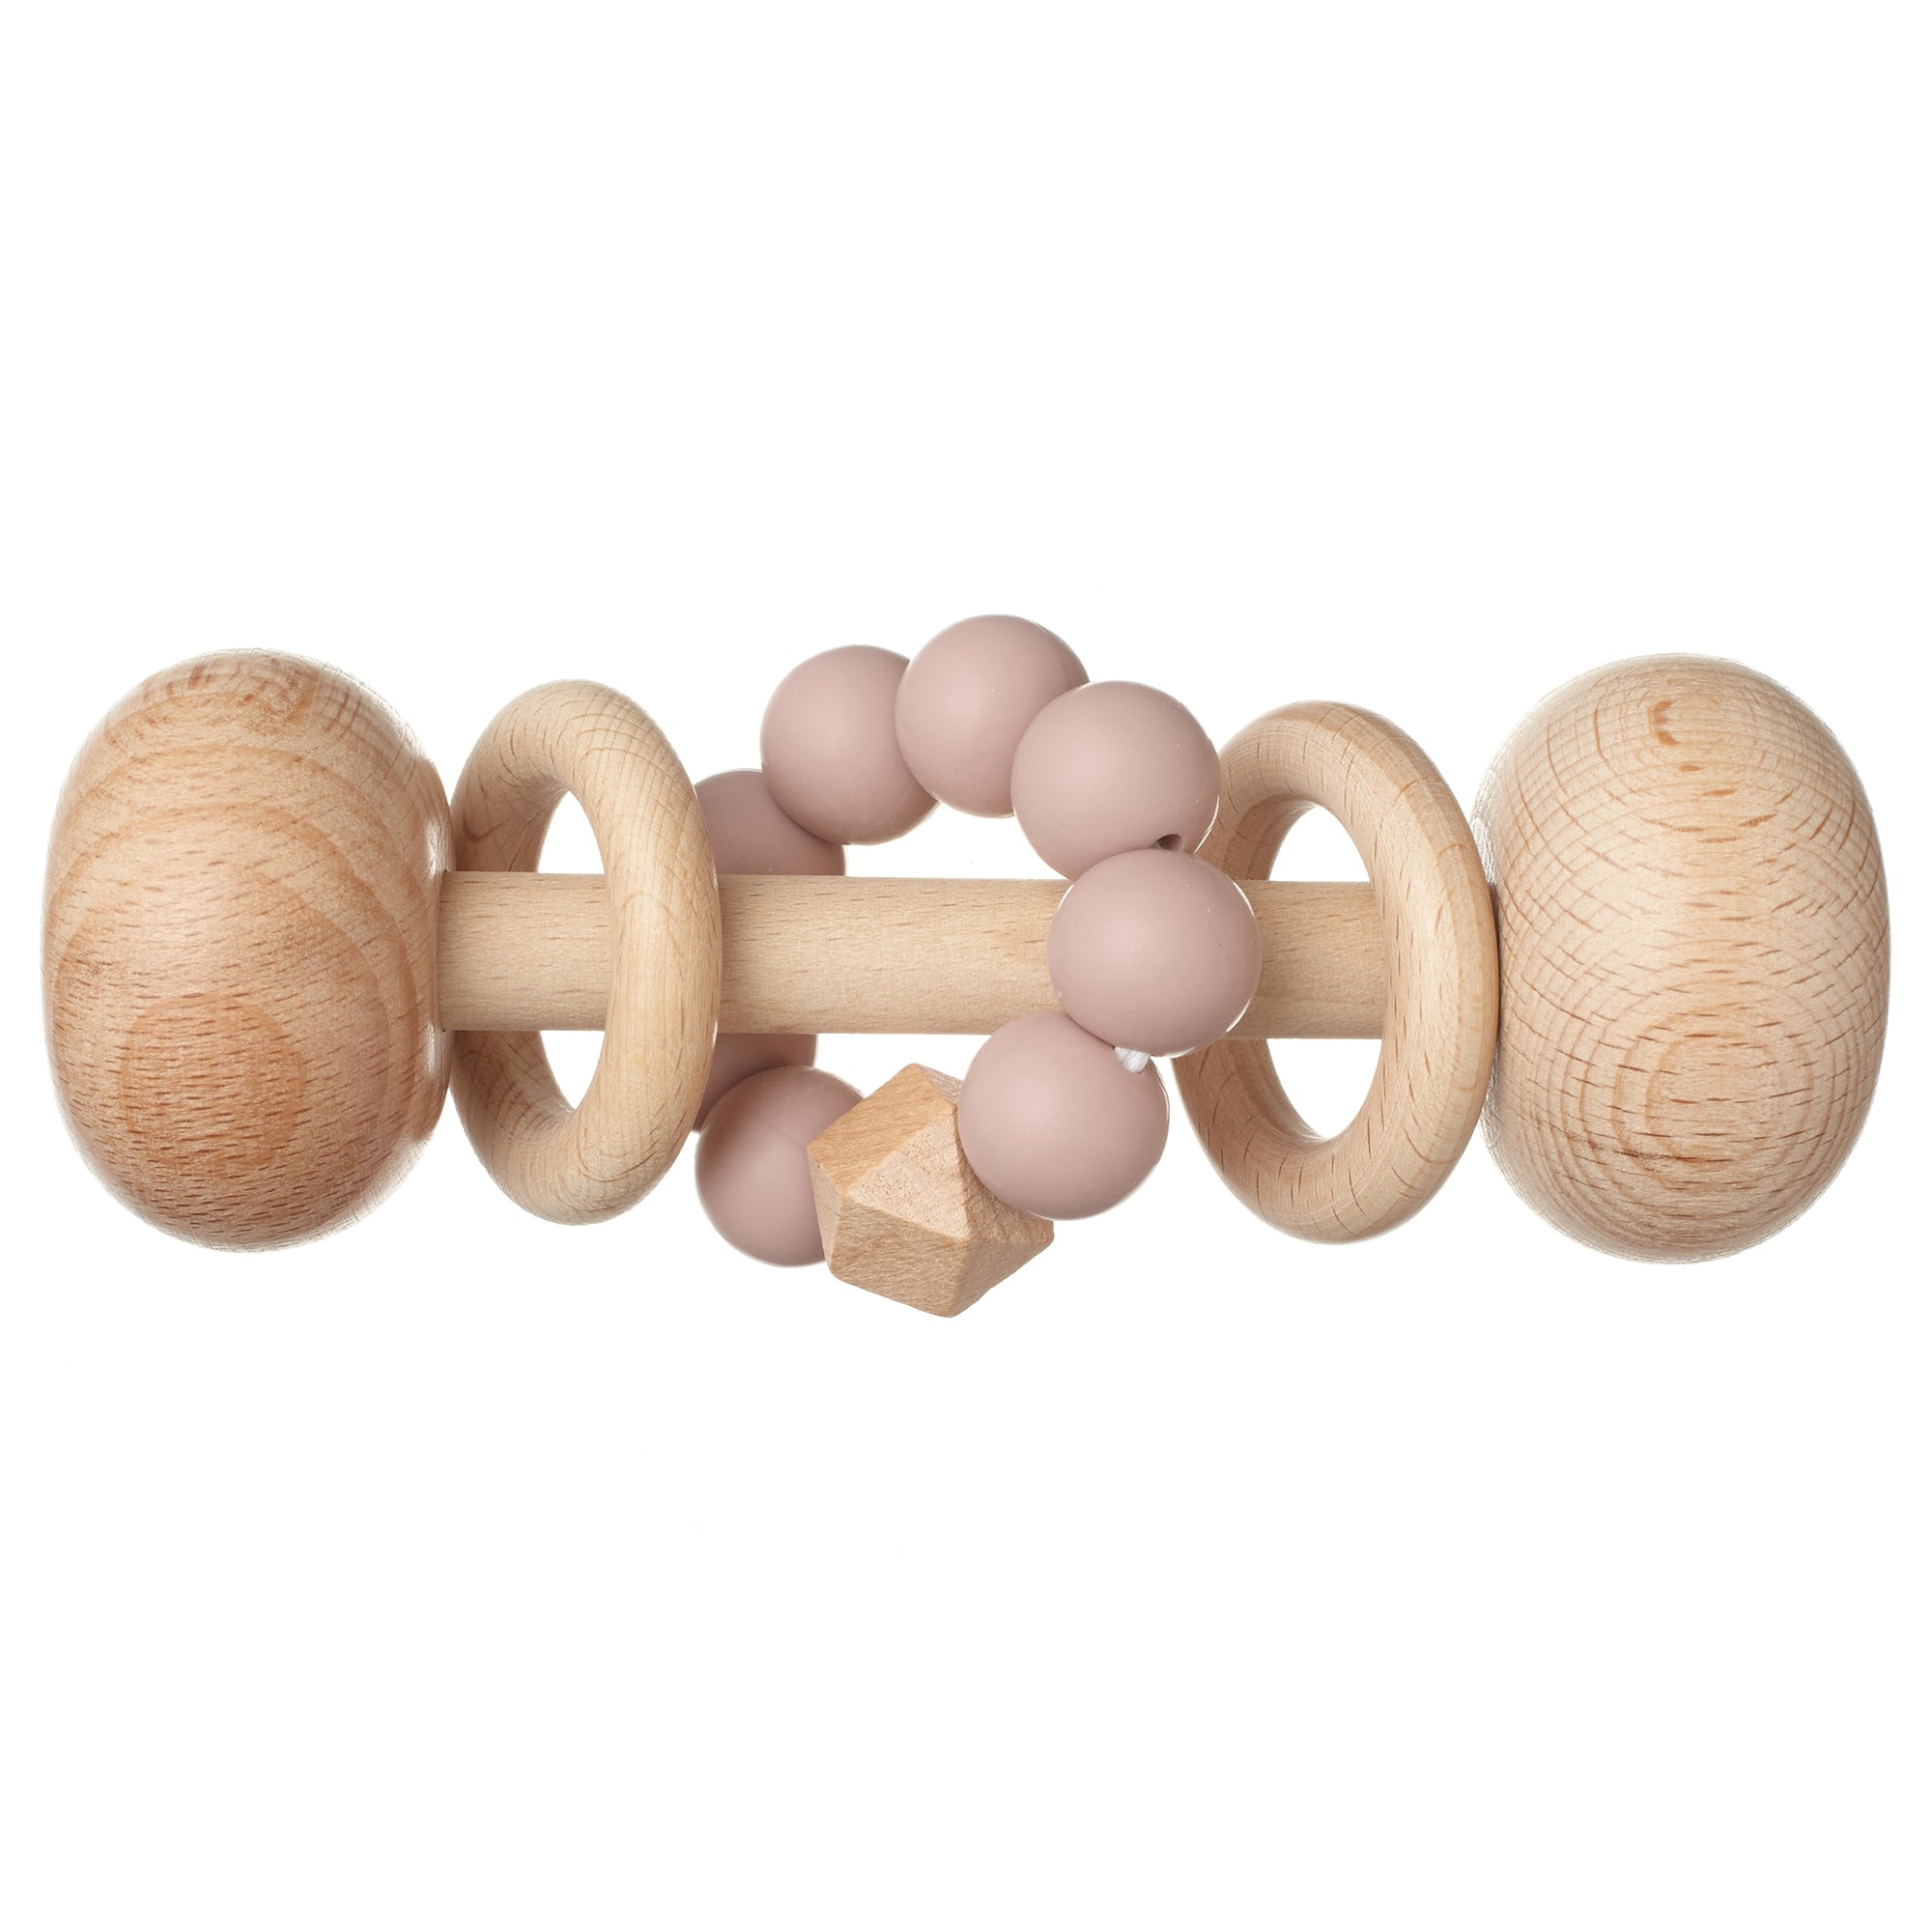 Wooden Rattle Toys for Babies with Silicone Beads | Blush